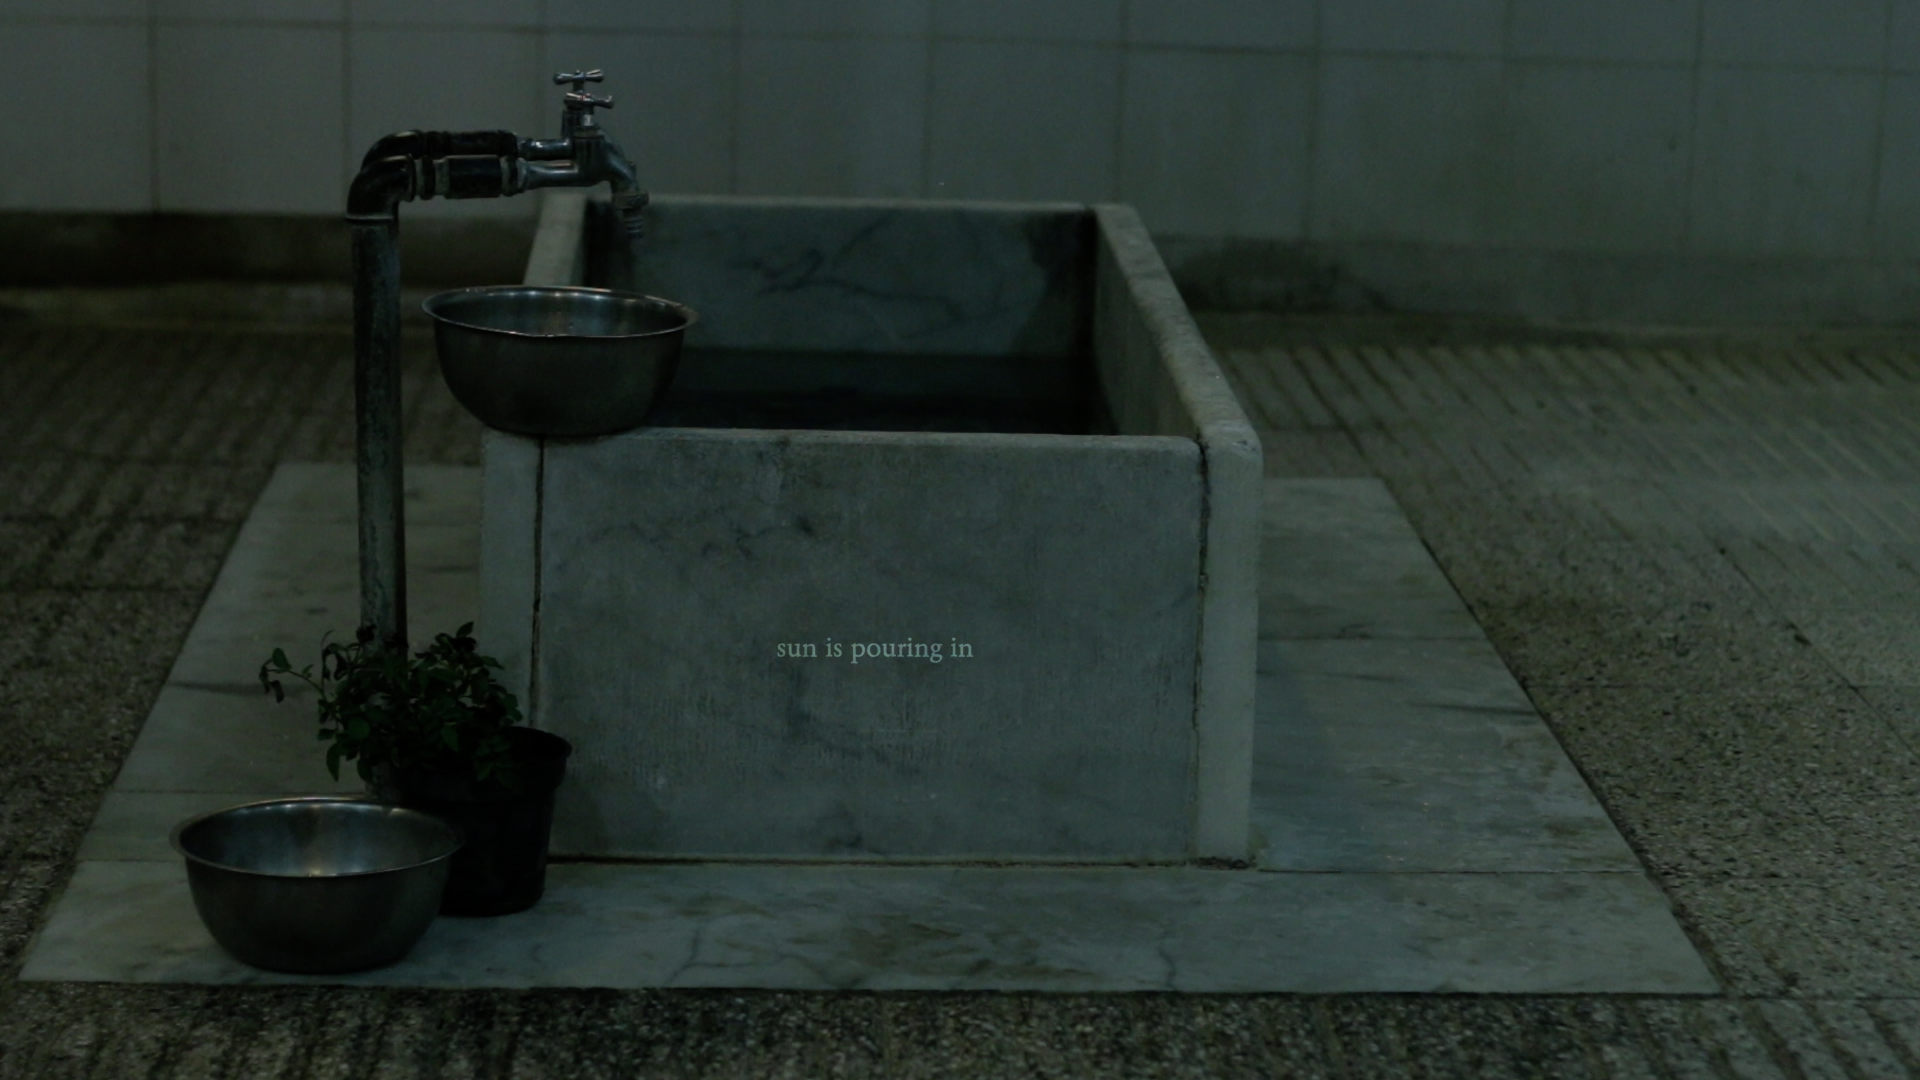 a large marble basin with faucets in an iranian public bath is half filled with water. Two steel bowls and a potted plant sit near the basin. On its side is a small text in white that reads “sun is pouring in”